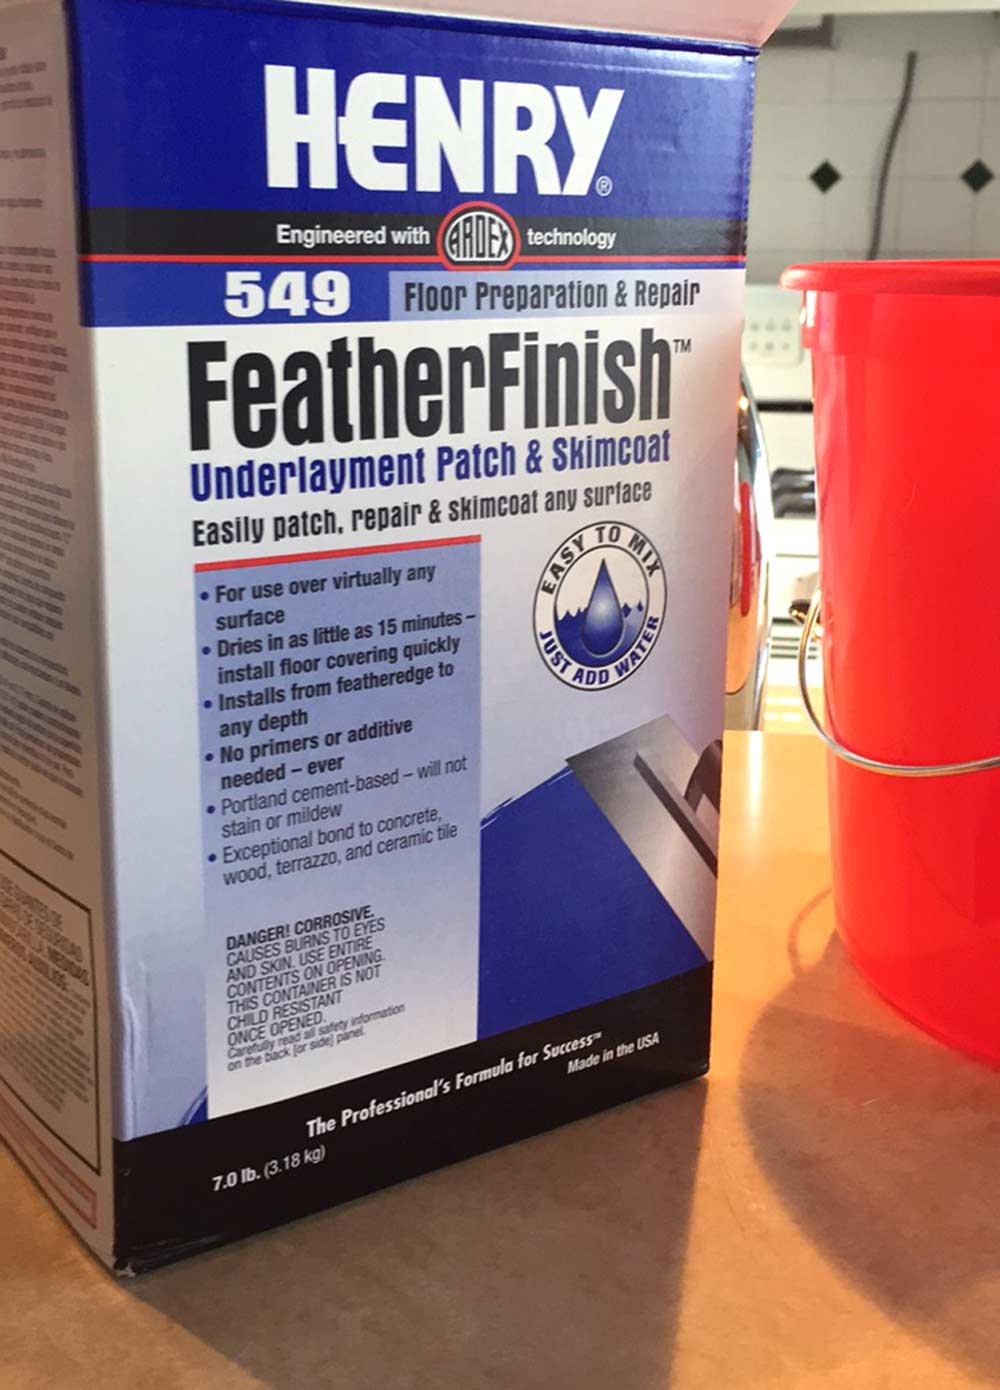 Using Henry FeatherFinish for DIY concrete counters over existing tile countertops